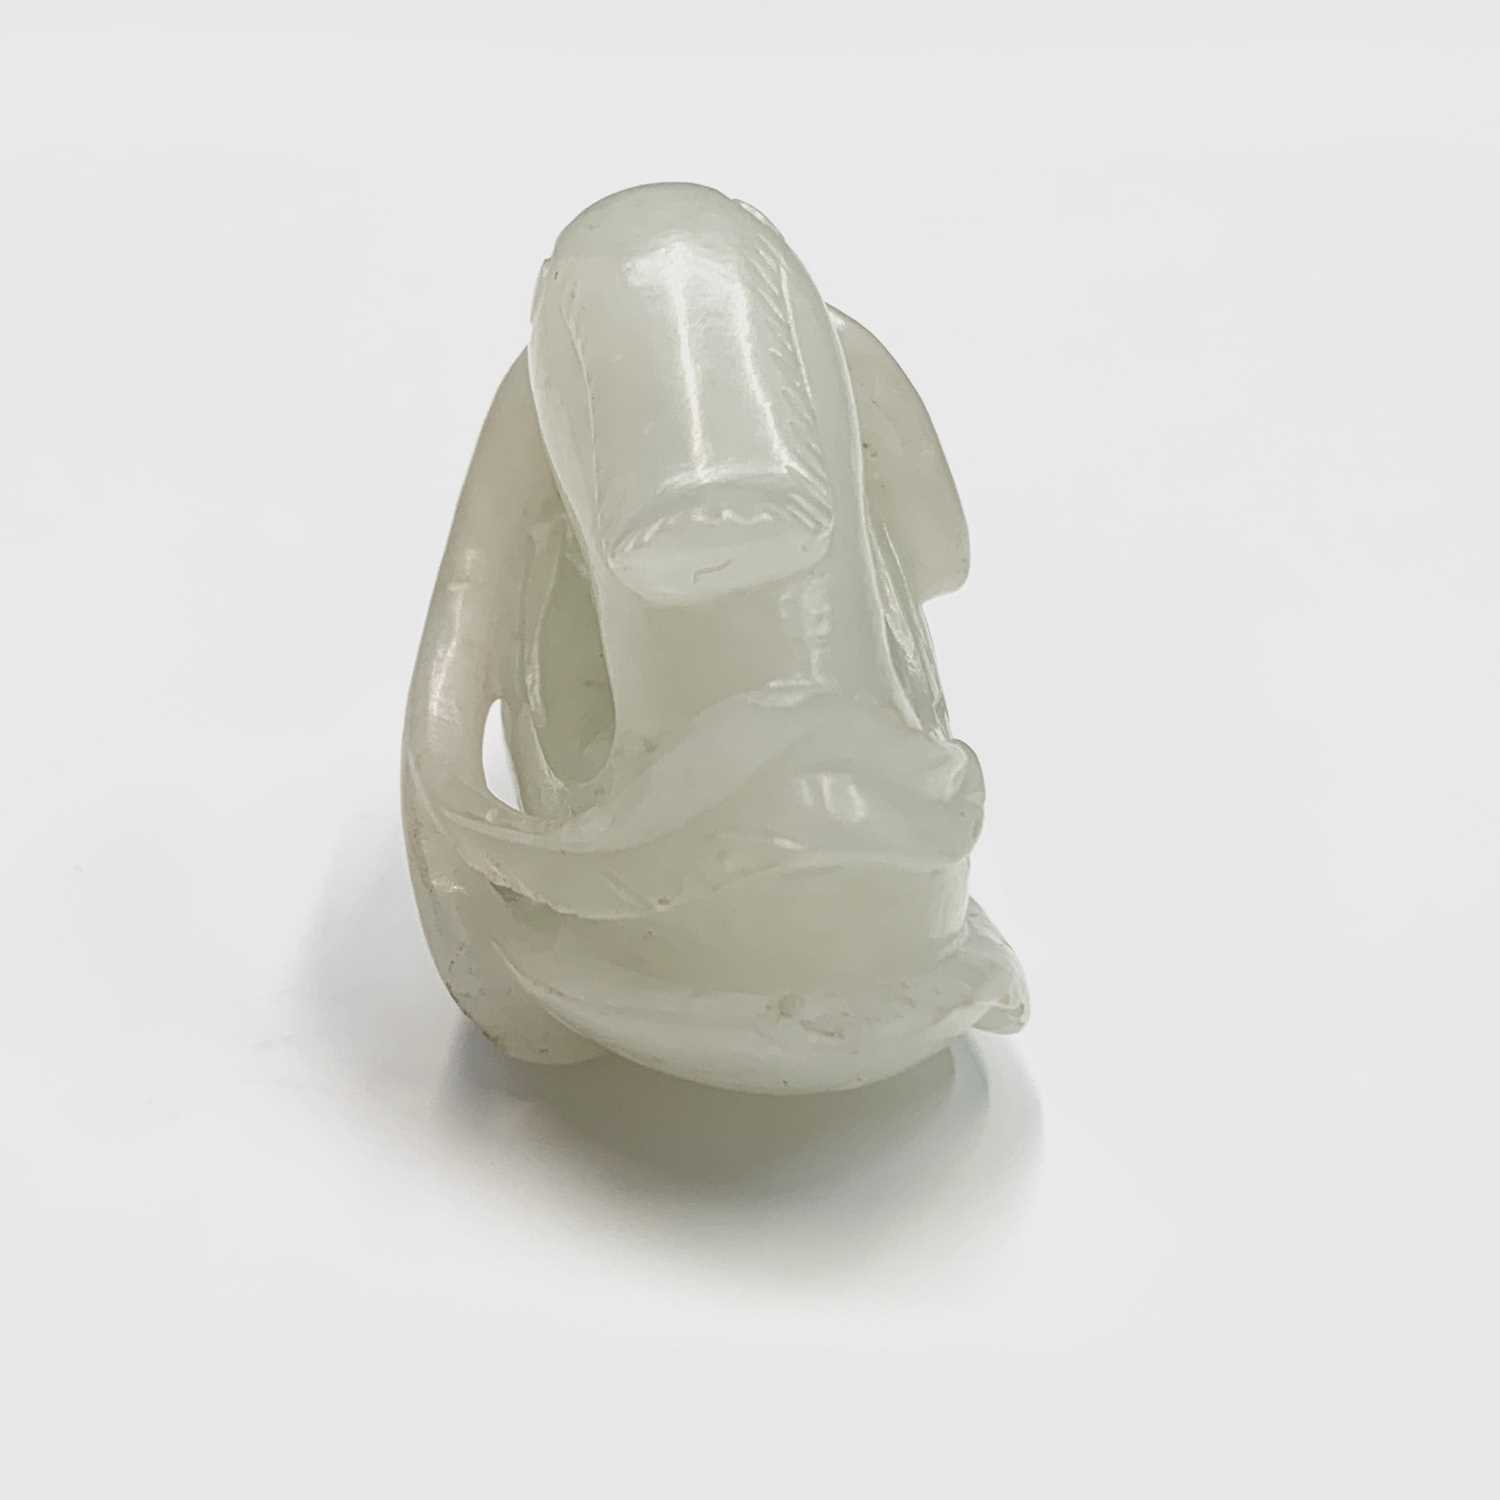 A small Chinese white jade carving of a duck, Qing dynasty, 19th century, height 3cm, width 4.5cm. - Image 10 of 11